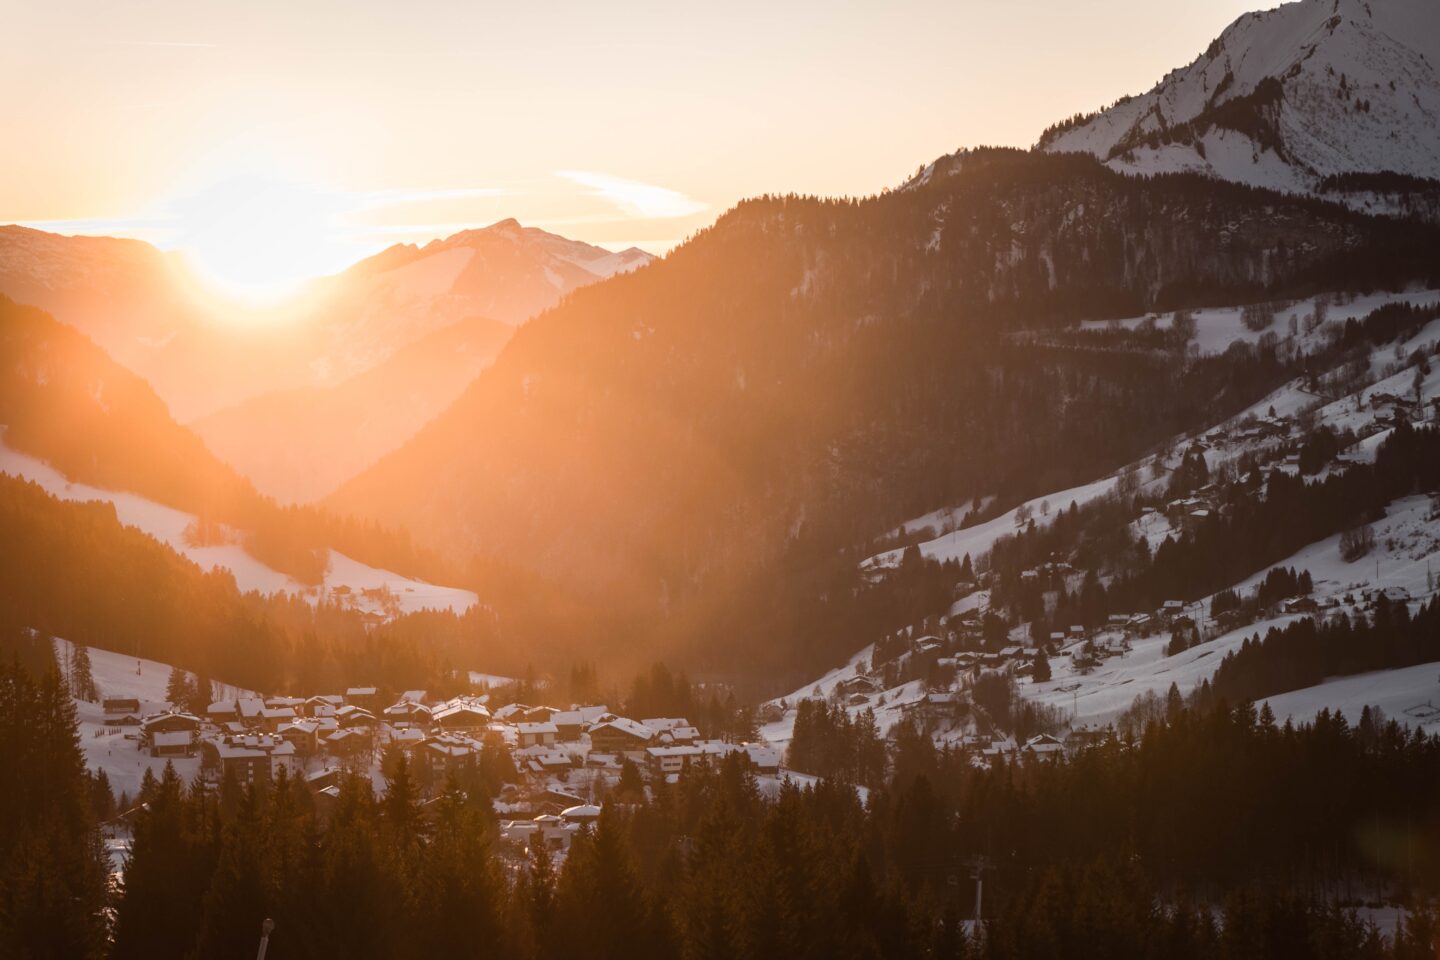 ski town in europe with orange glare of sun over mountain town in valley covered in snow